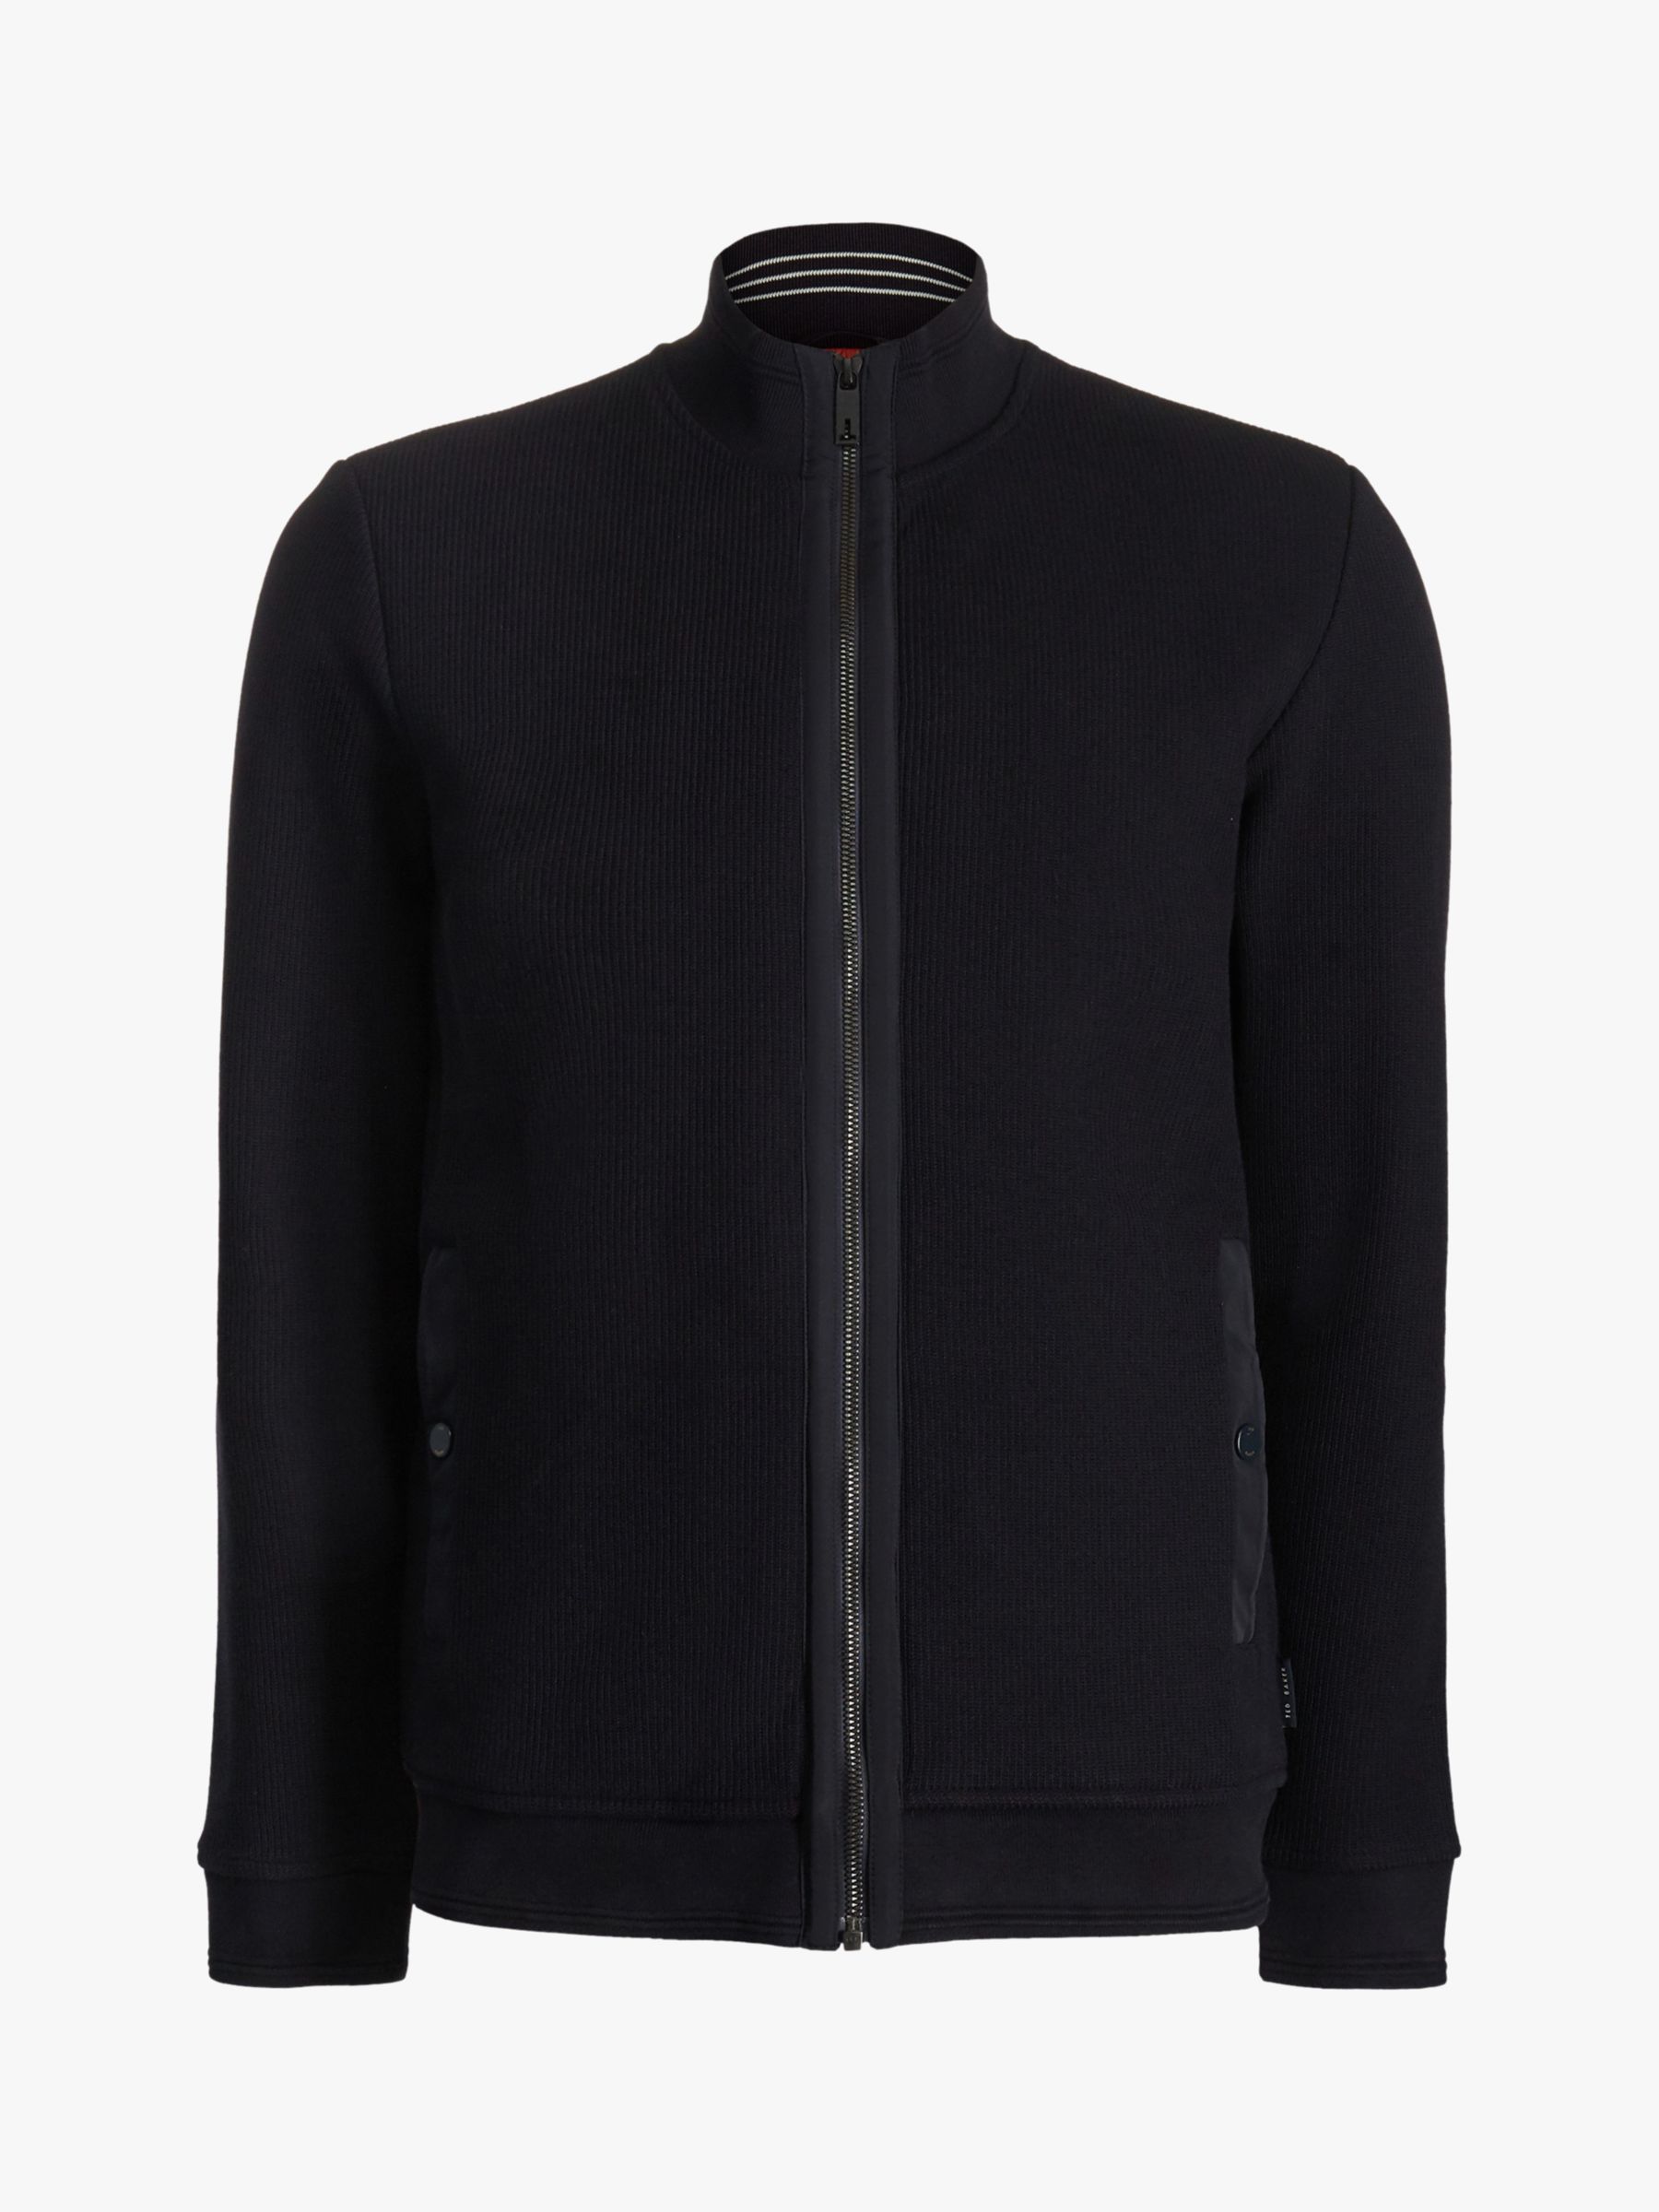 Ted Baker Packing Layering Jacket, Navy Blue